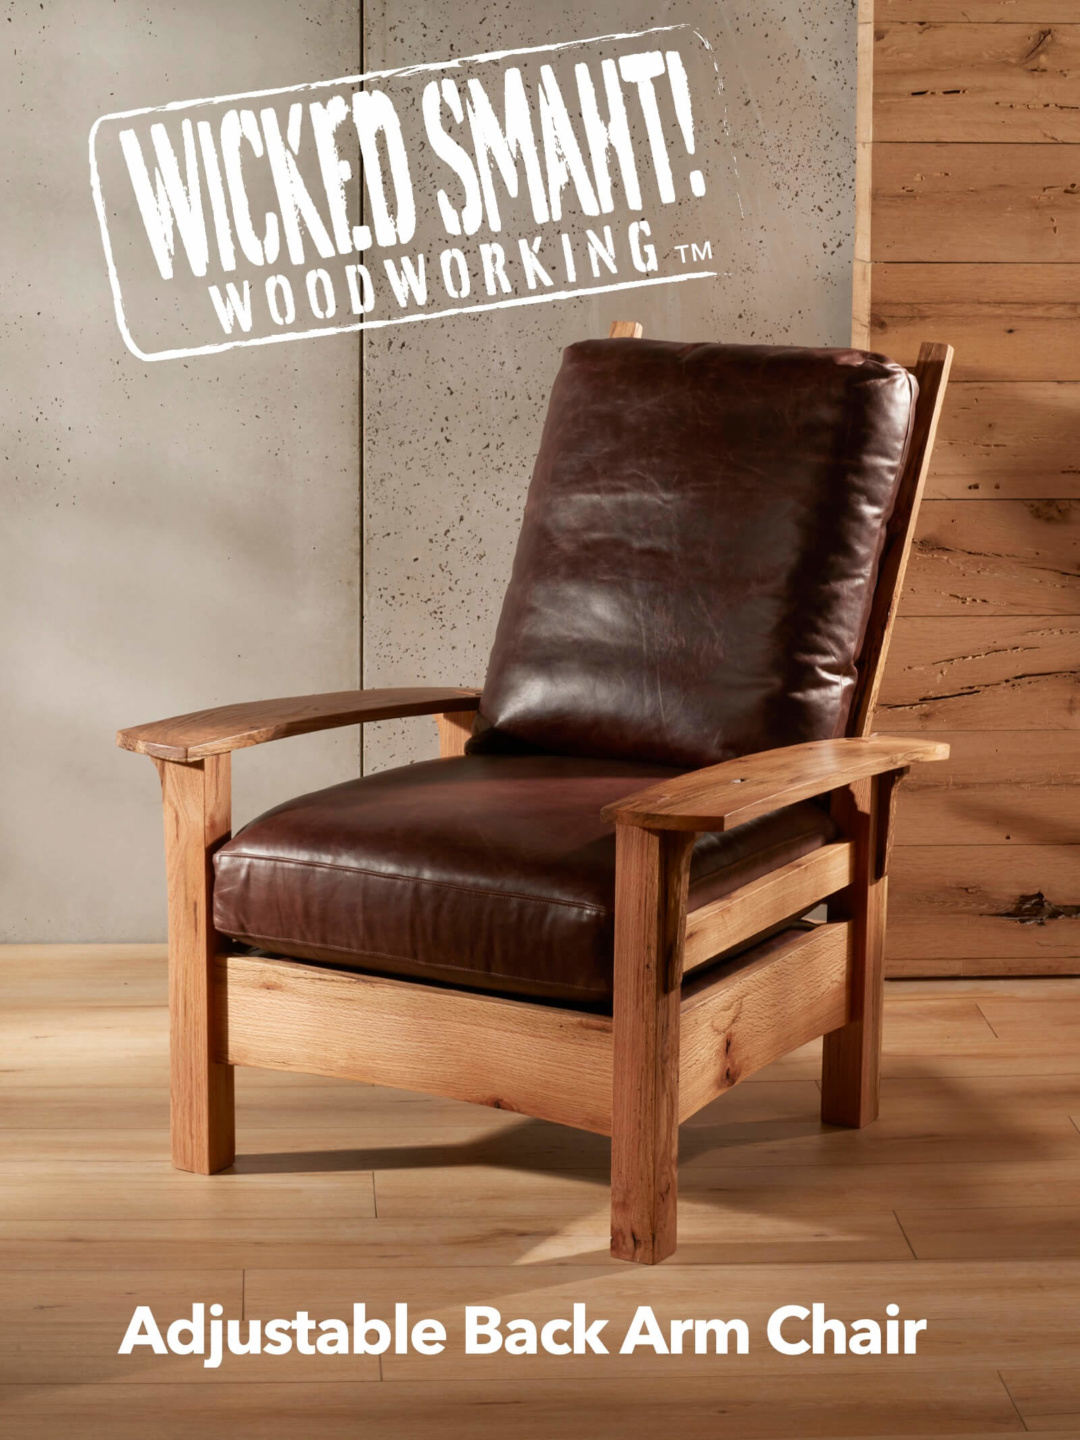 Wicked Smaht Woodworking: Adjustable Back Arm Chair – Procedure